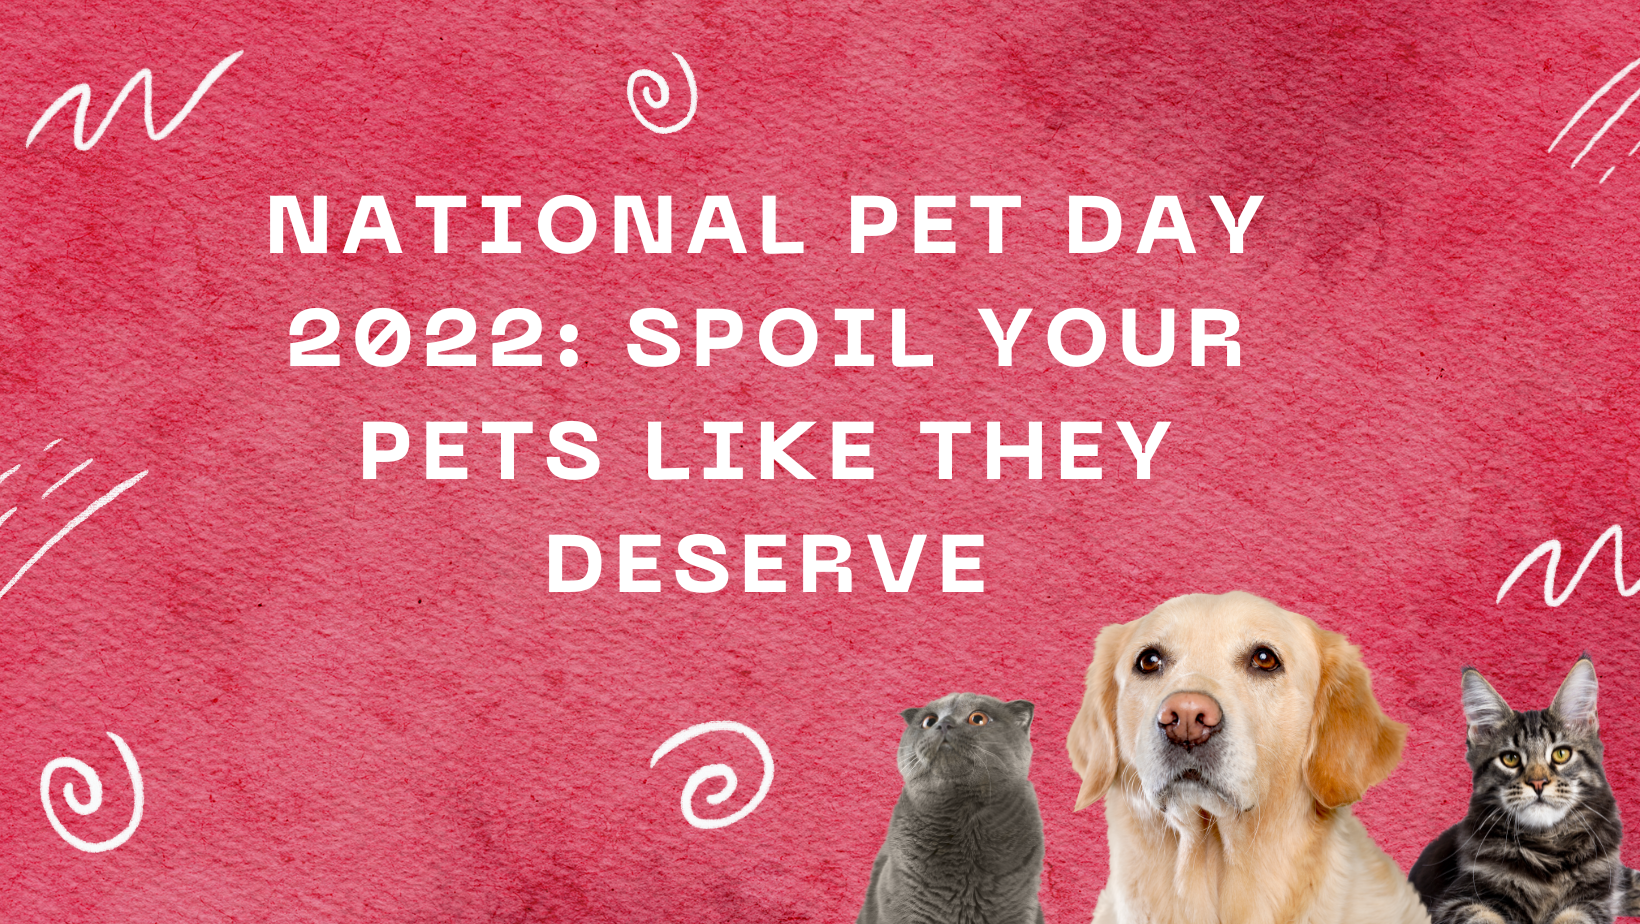 National Pet Day 2022: Spoil Your Pets Like They Deserve